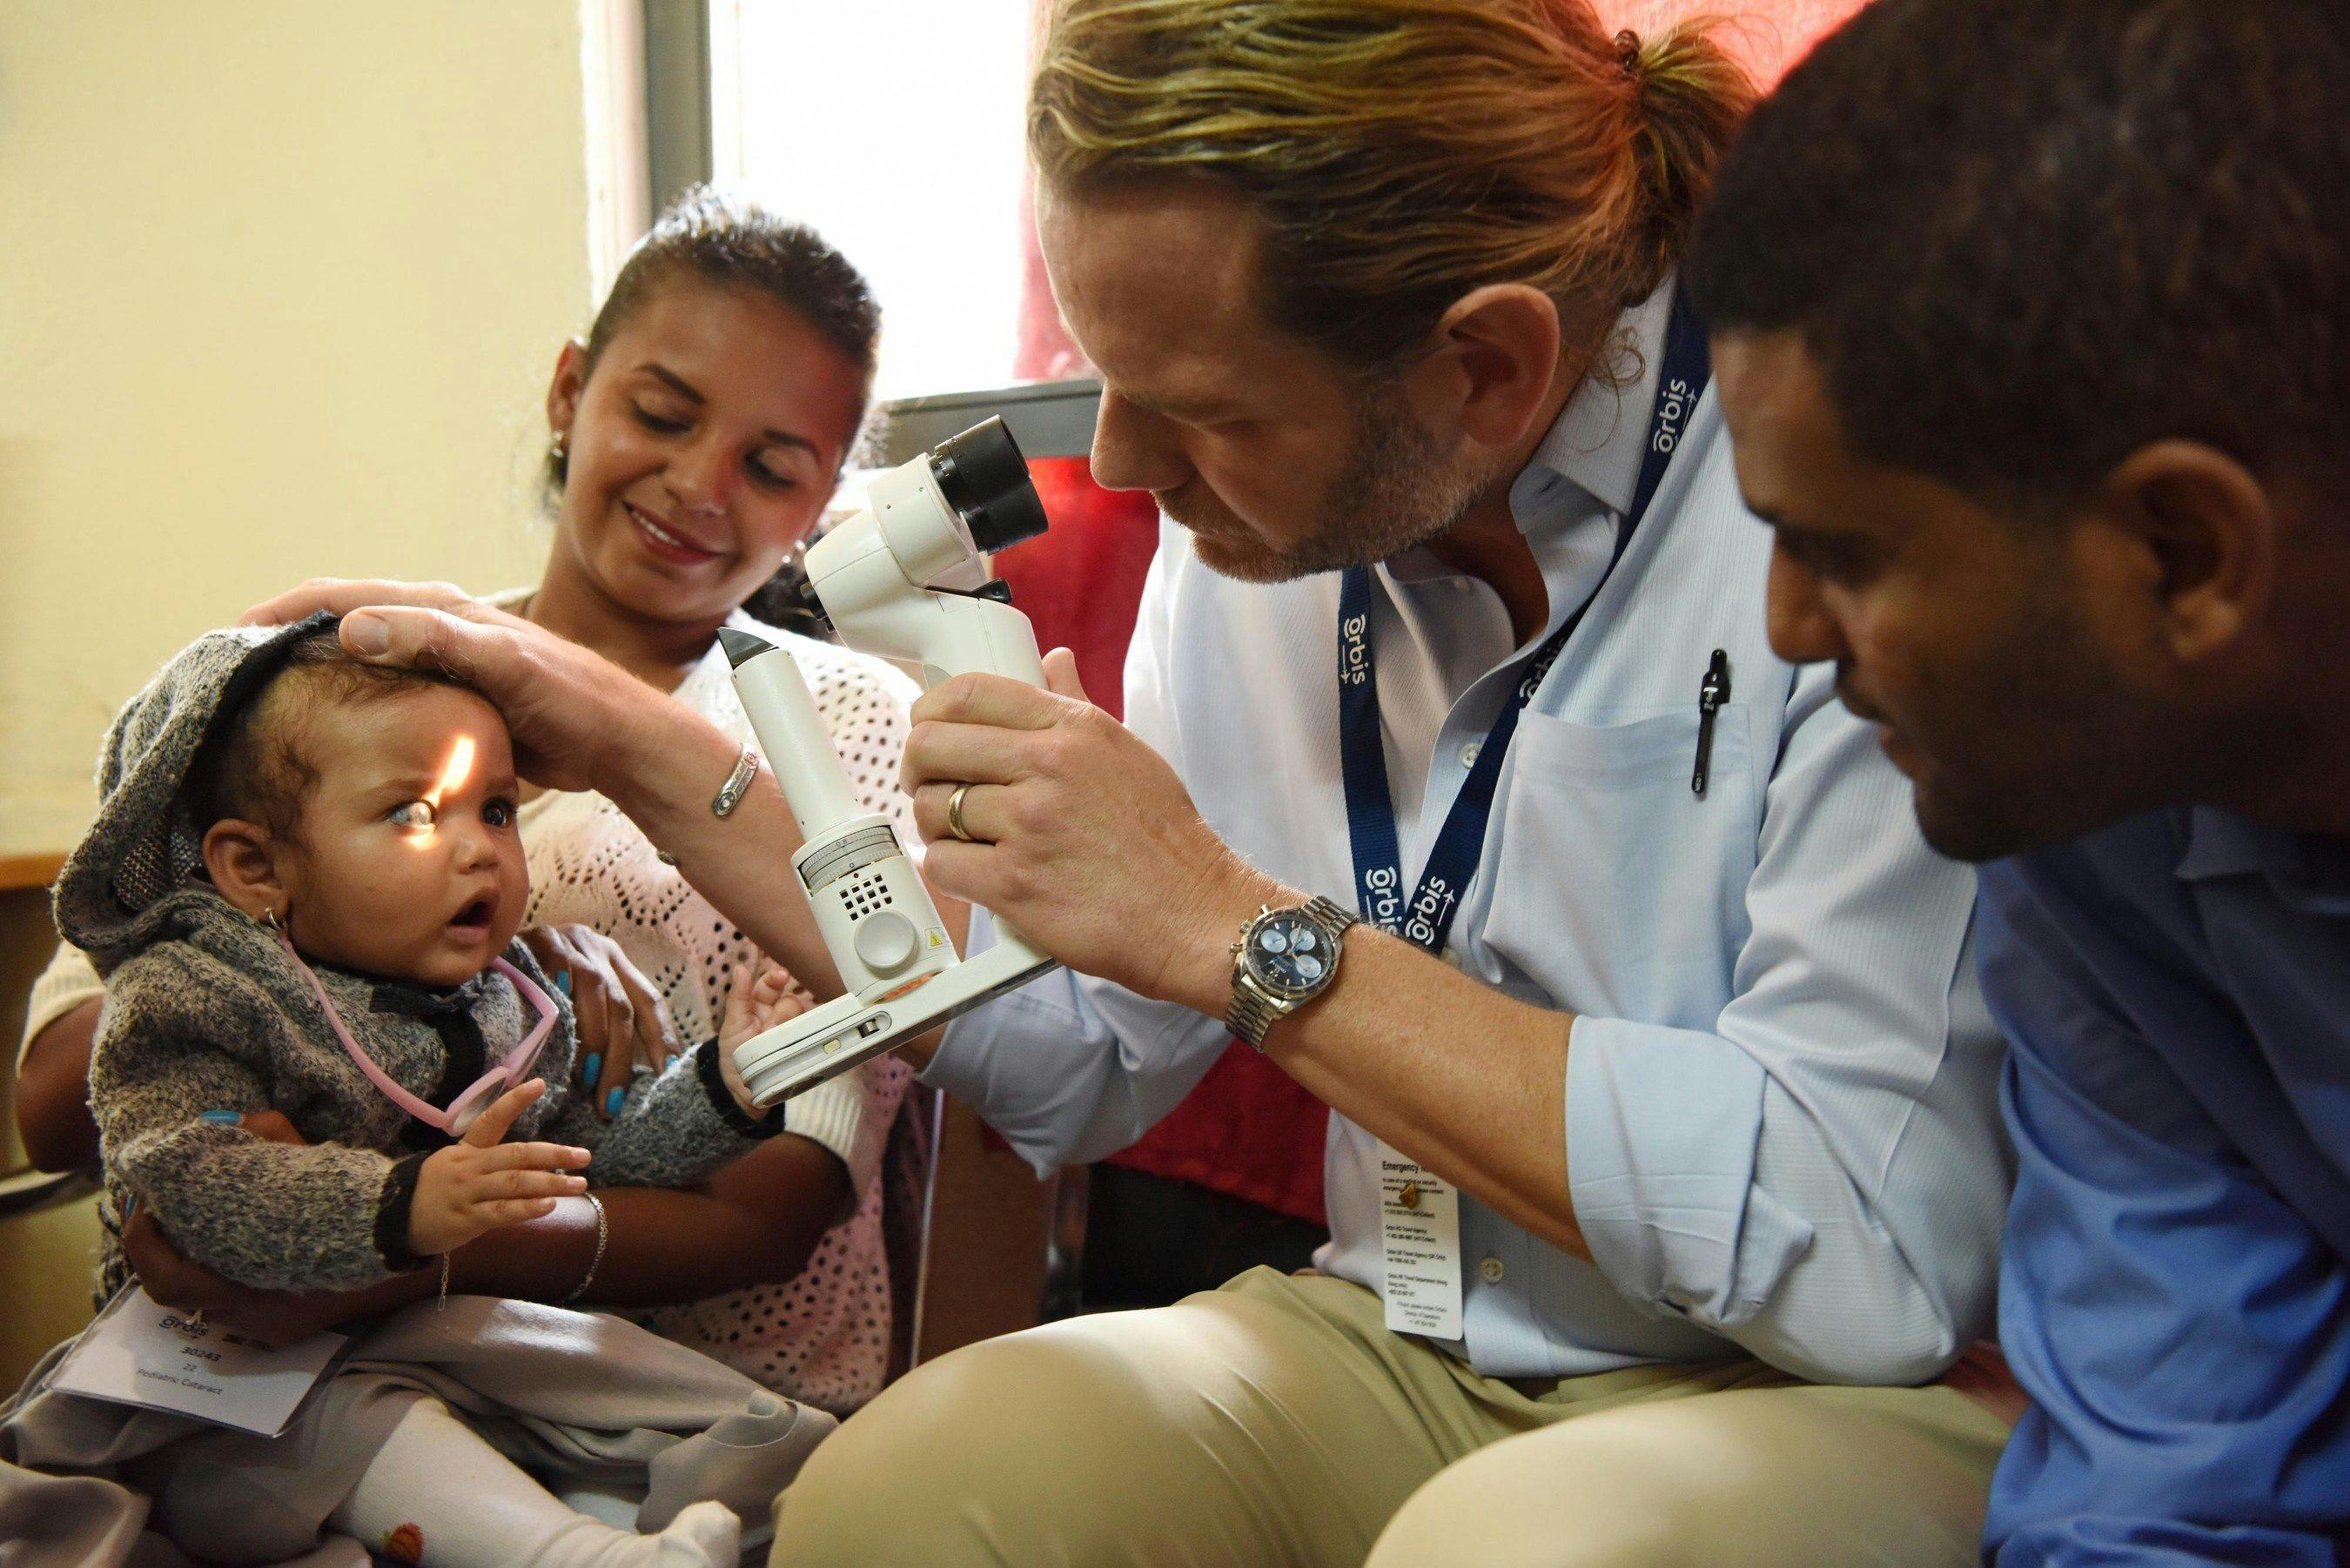 Nine-month-old Mary, who was born with glaucoma, is examined by Orbis Volunteer Faculty surgeon Daniel Neely, MD, during a Flying Eye Hospital program in Ethiopia in 2018. The virtual Flying Eye Hospital program will help eye care professionals in the country build their skills to treat glaucoma and cataract, leading causes of blindness and visual impairment, through online training. (Image courtesy of Geoff Oliver Bugbee/Orbis)